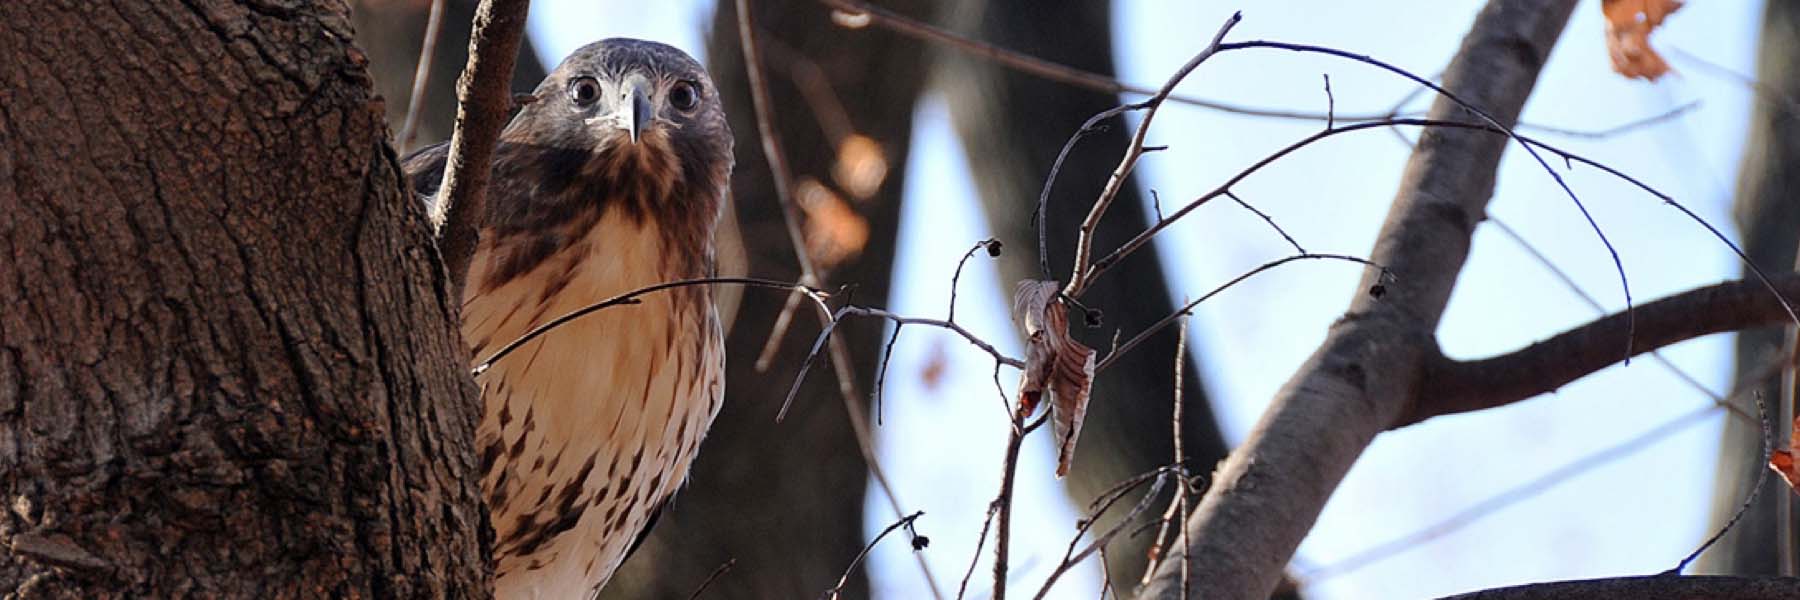 A Red-tailed Hawk perched on a branch looks out from behind the tree trunk.